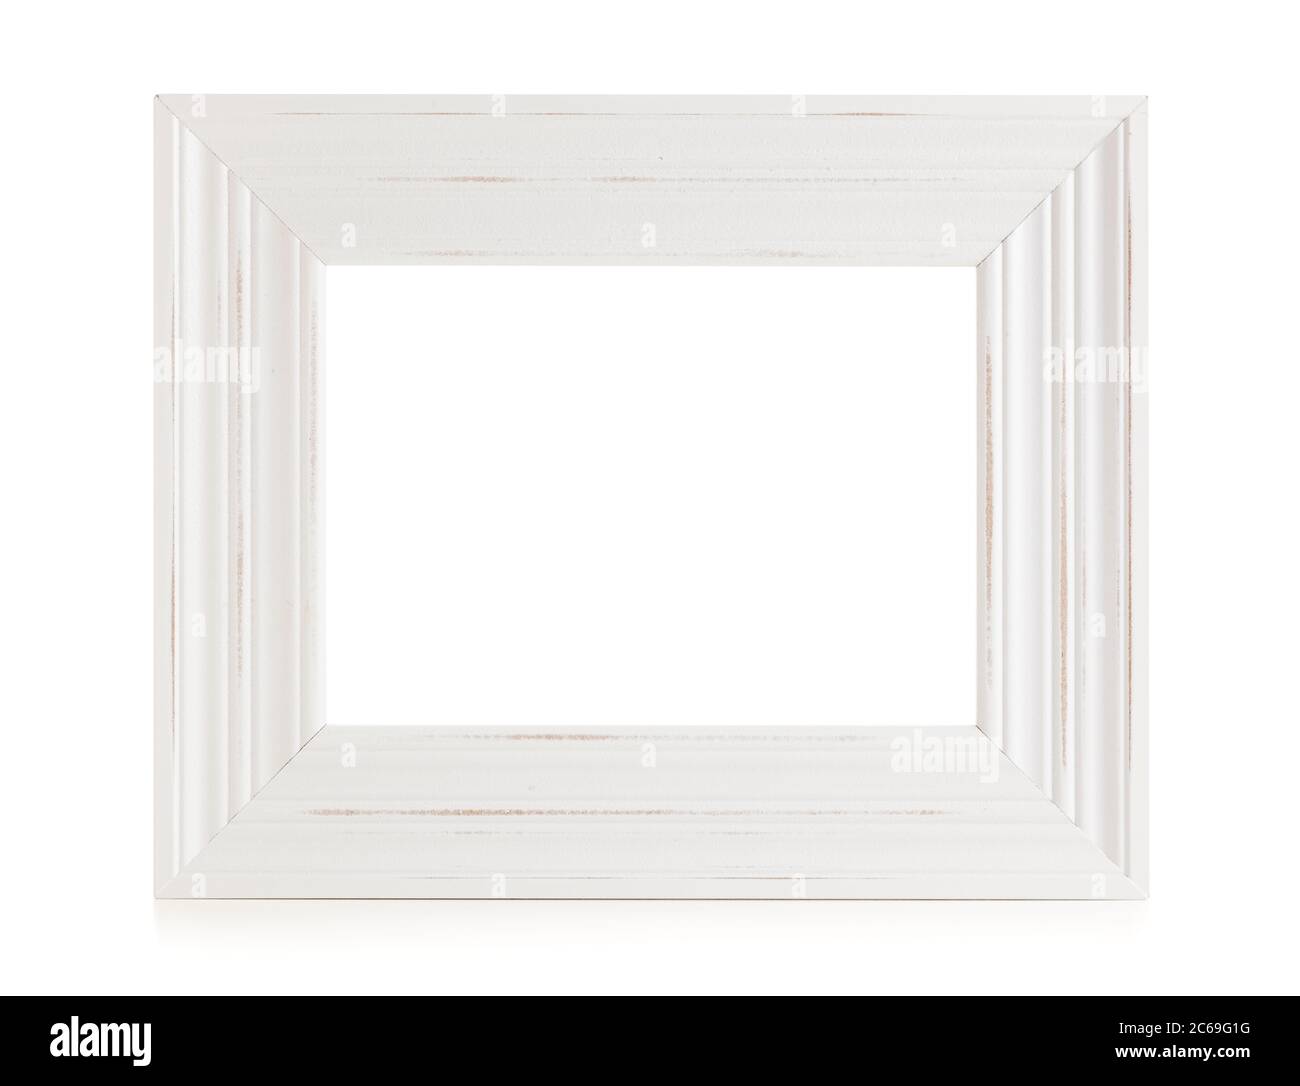 Vintage styled wooden white picture frame isolated with clipping path. Separate pathes for inside and outside of frame. Stock Photo